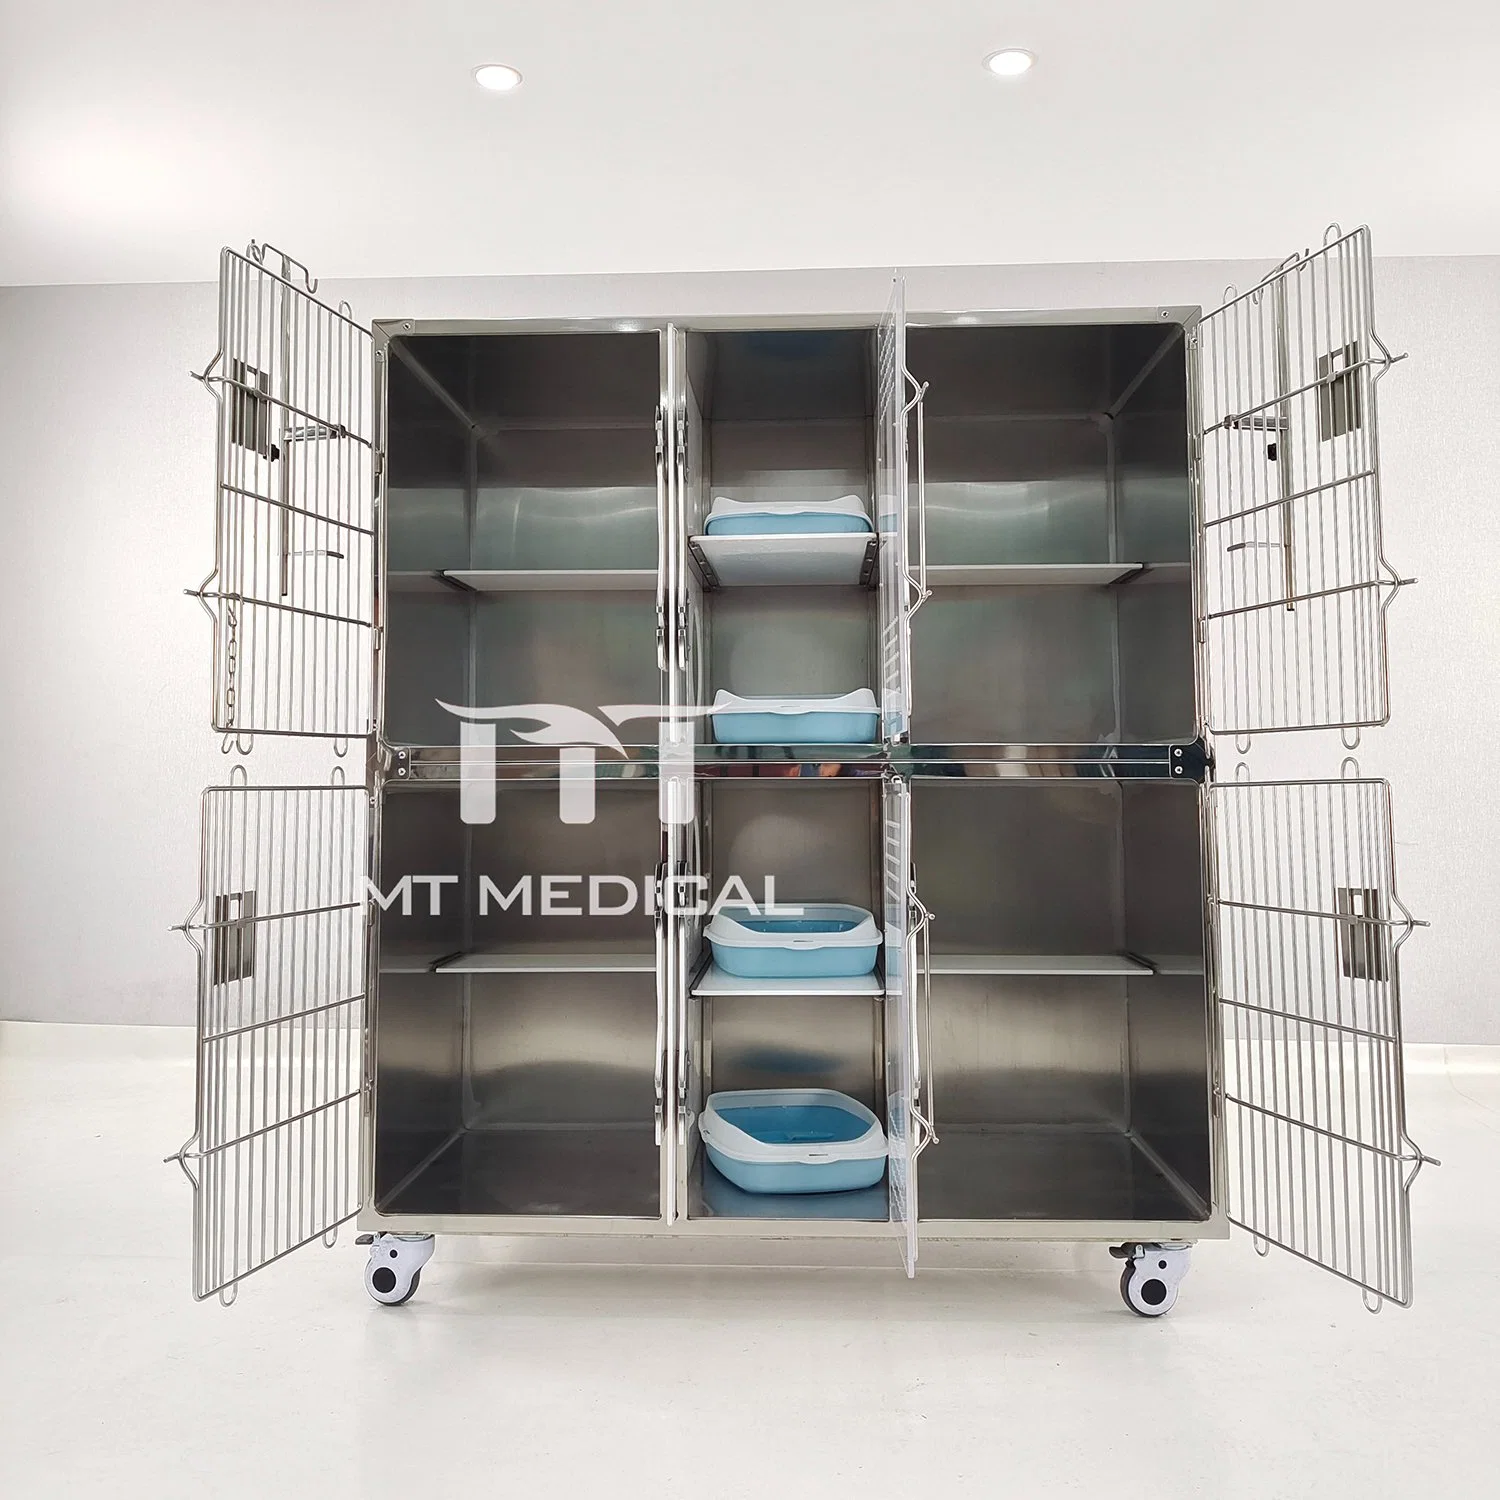 Mt Medical Pet Hospital New Design Luxury Stainless Separate Space Pet Cages Other Pet Cages